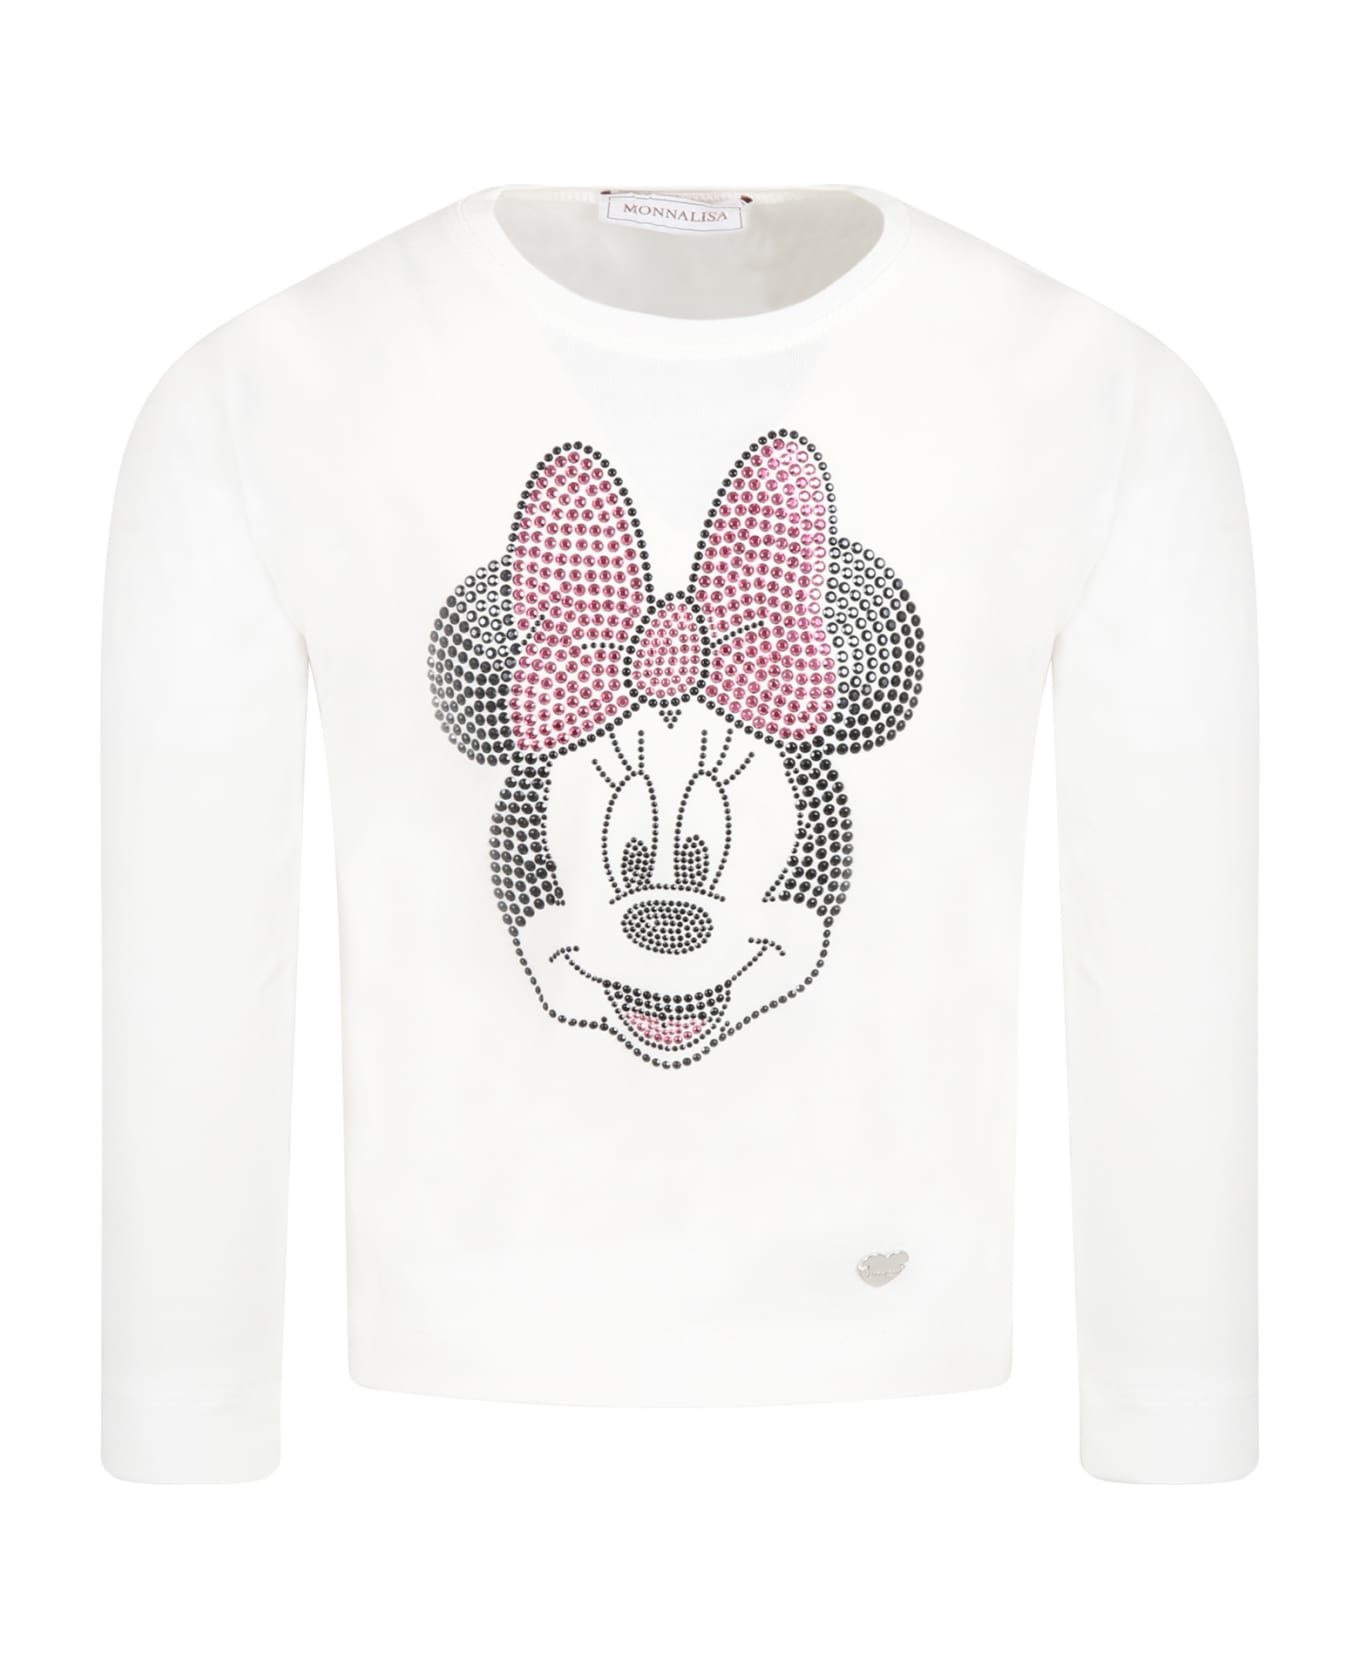 Monnalisa White T-shirt For Girl With Minnie Mouse - Ivory